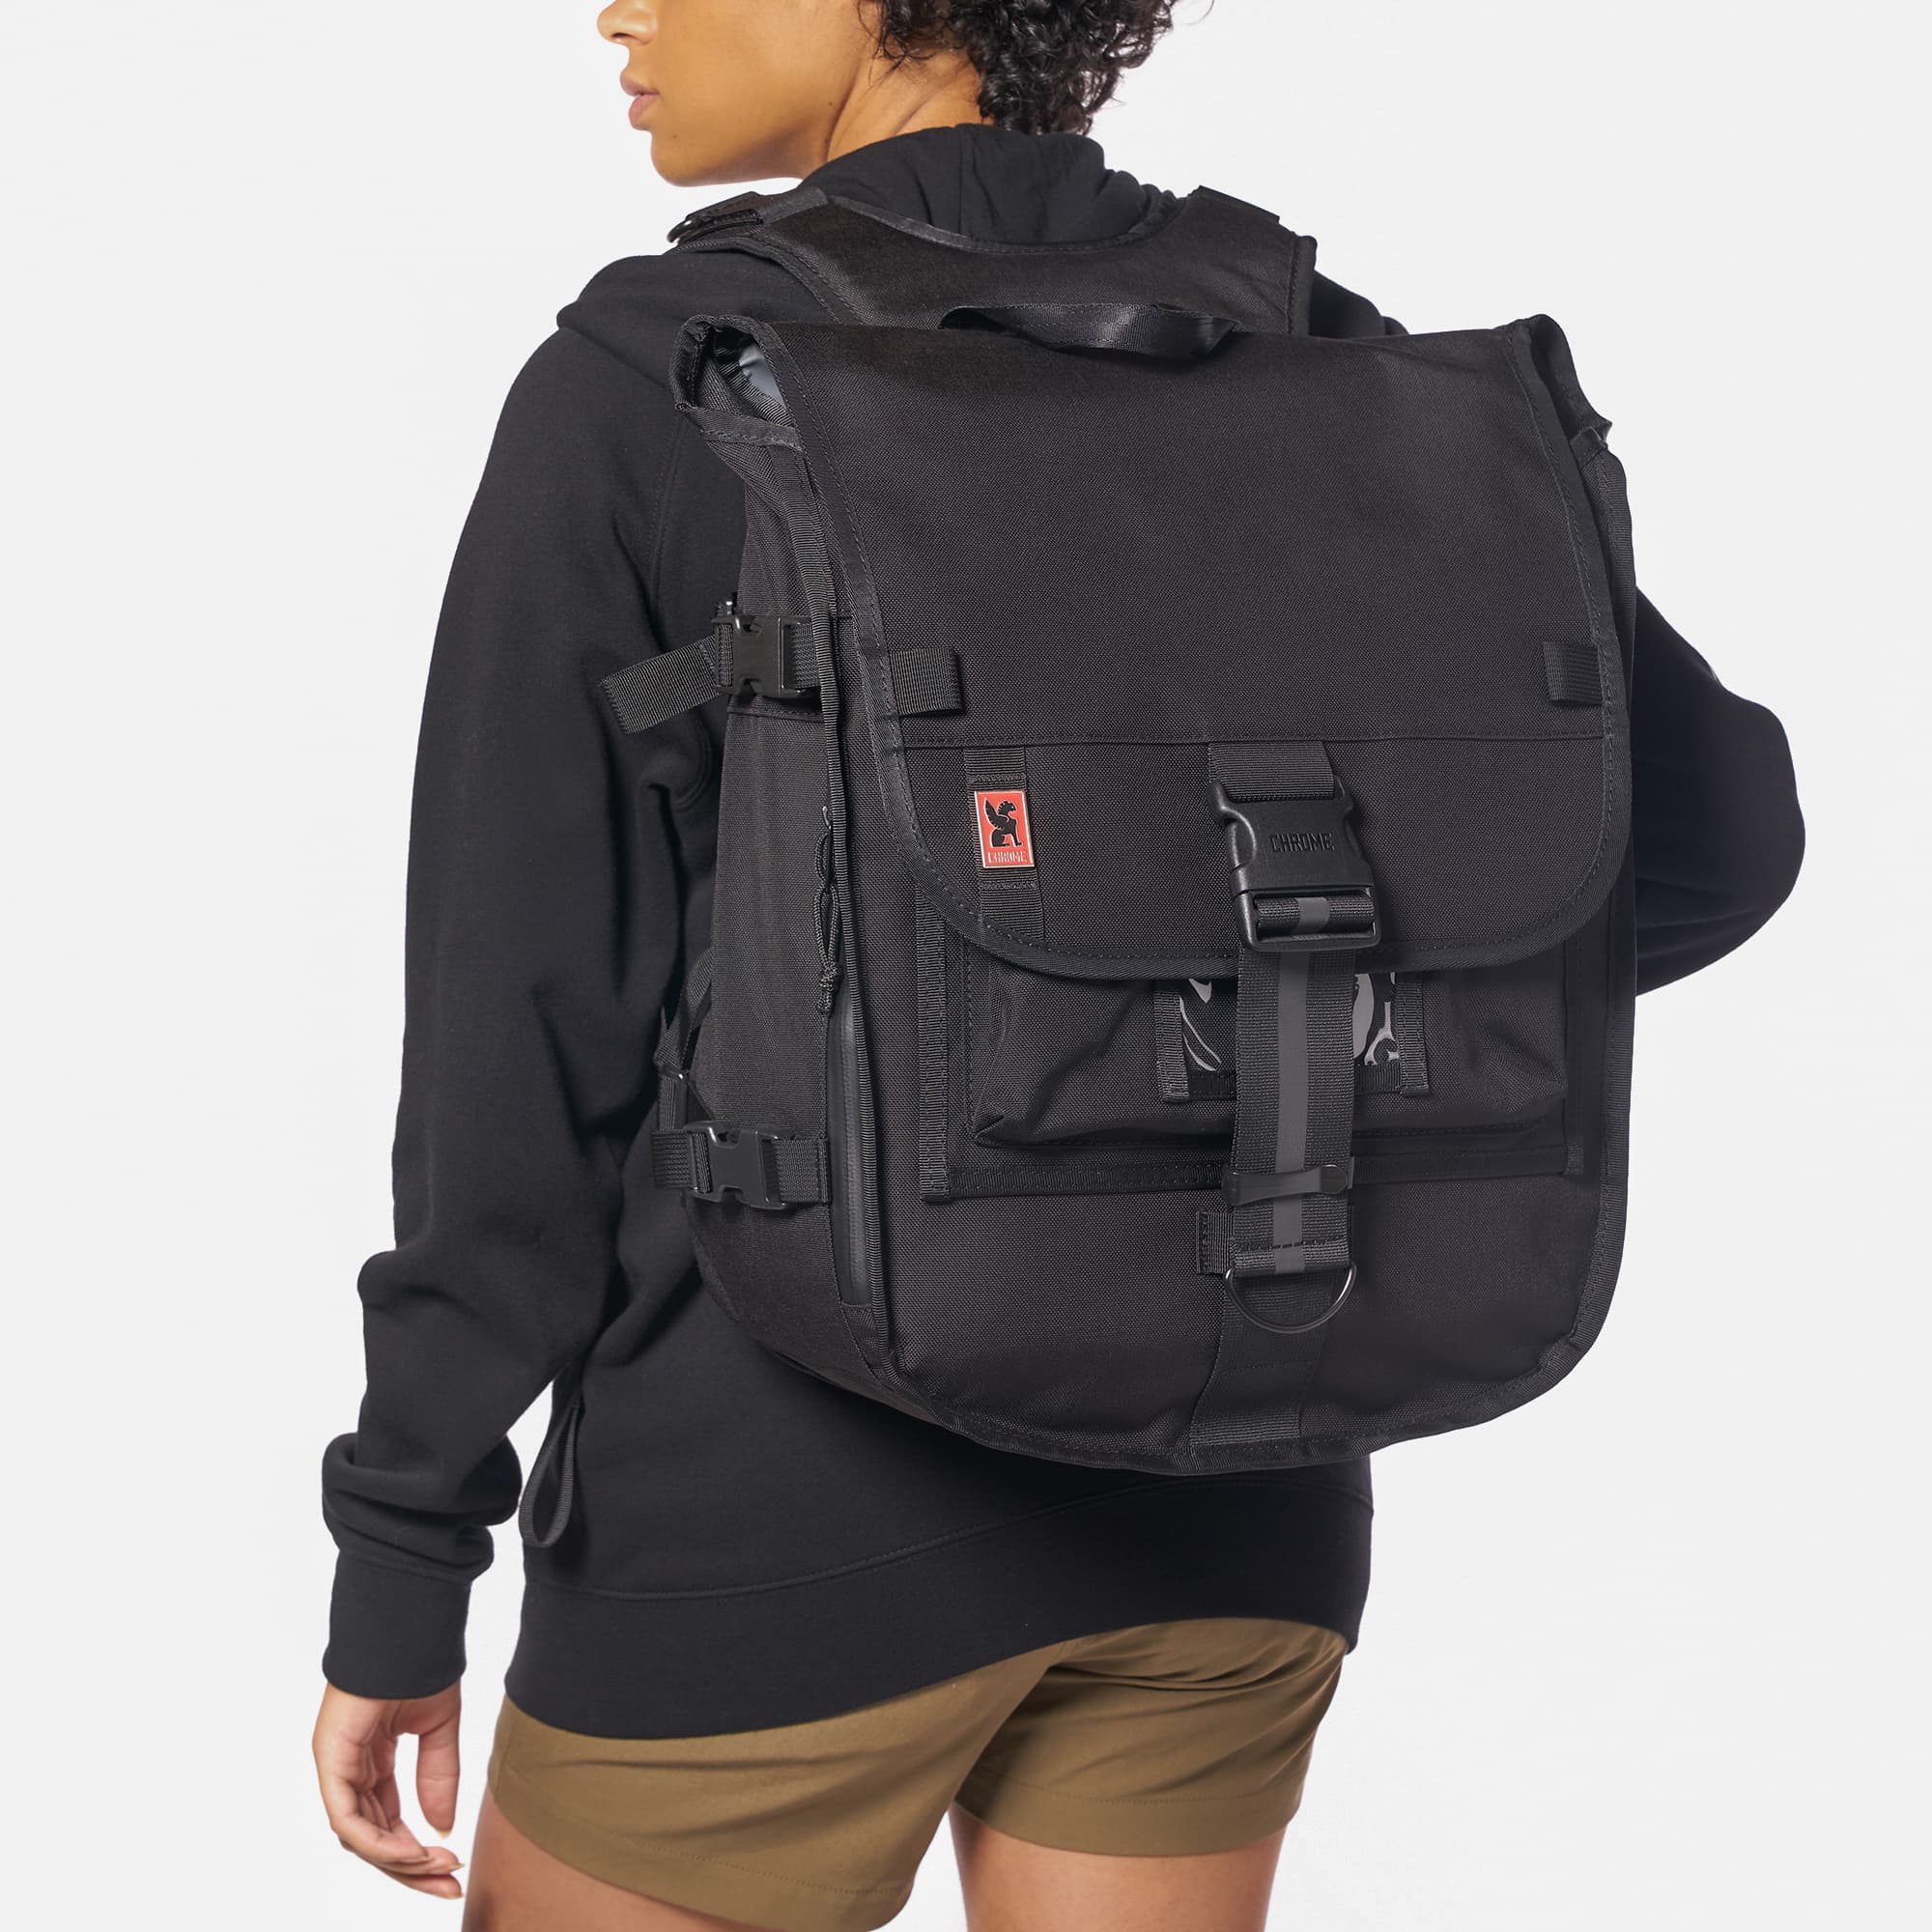 Warsaw medium size flap backpack in black worn by a woman